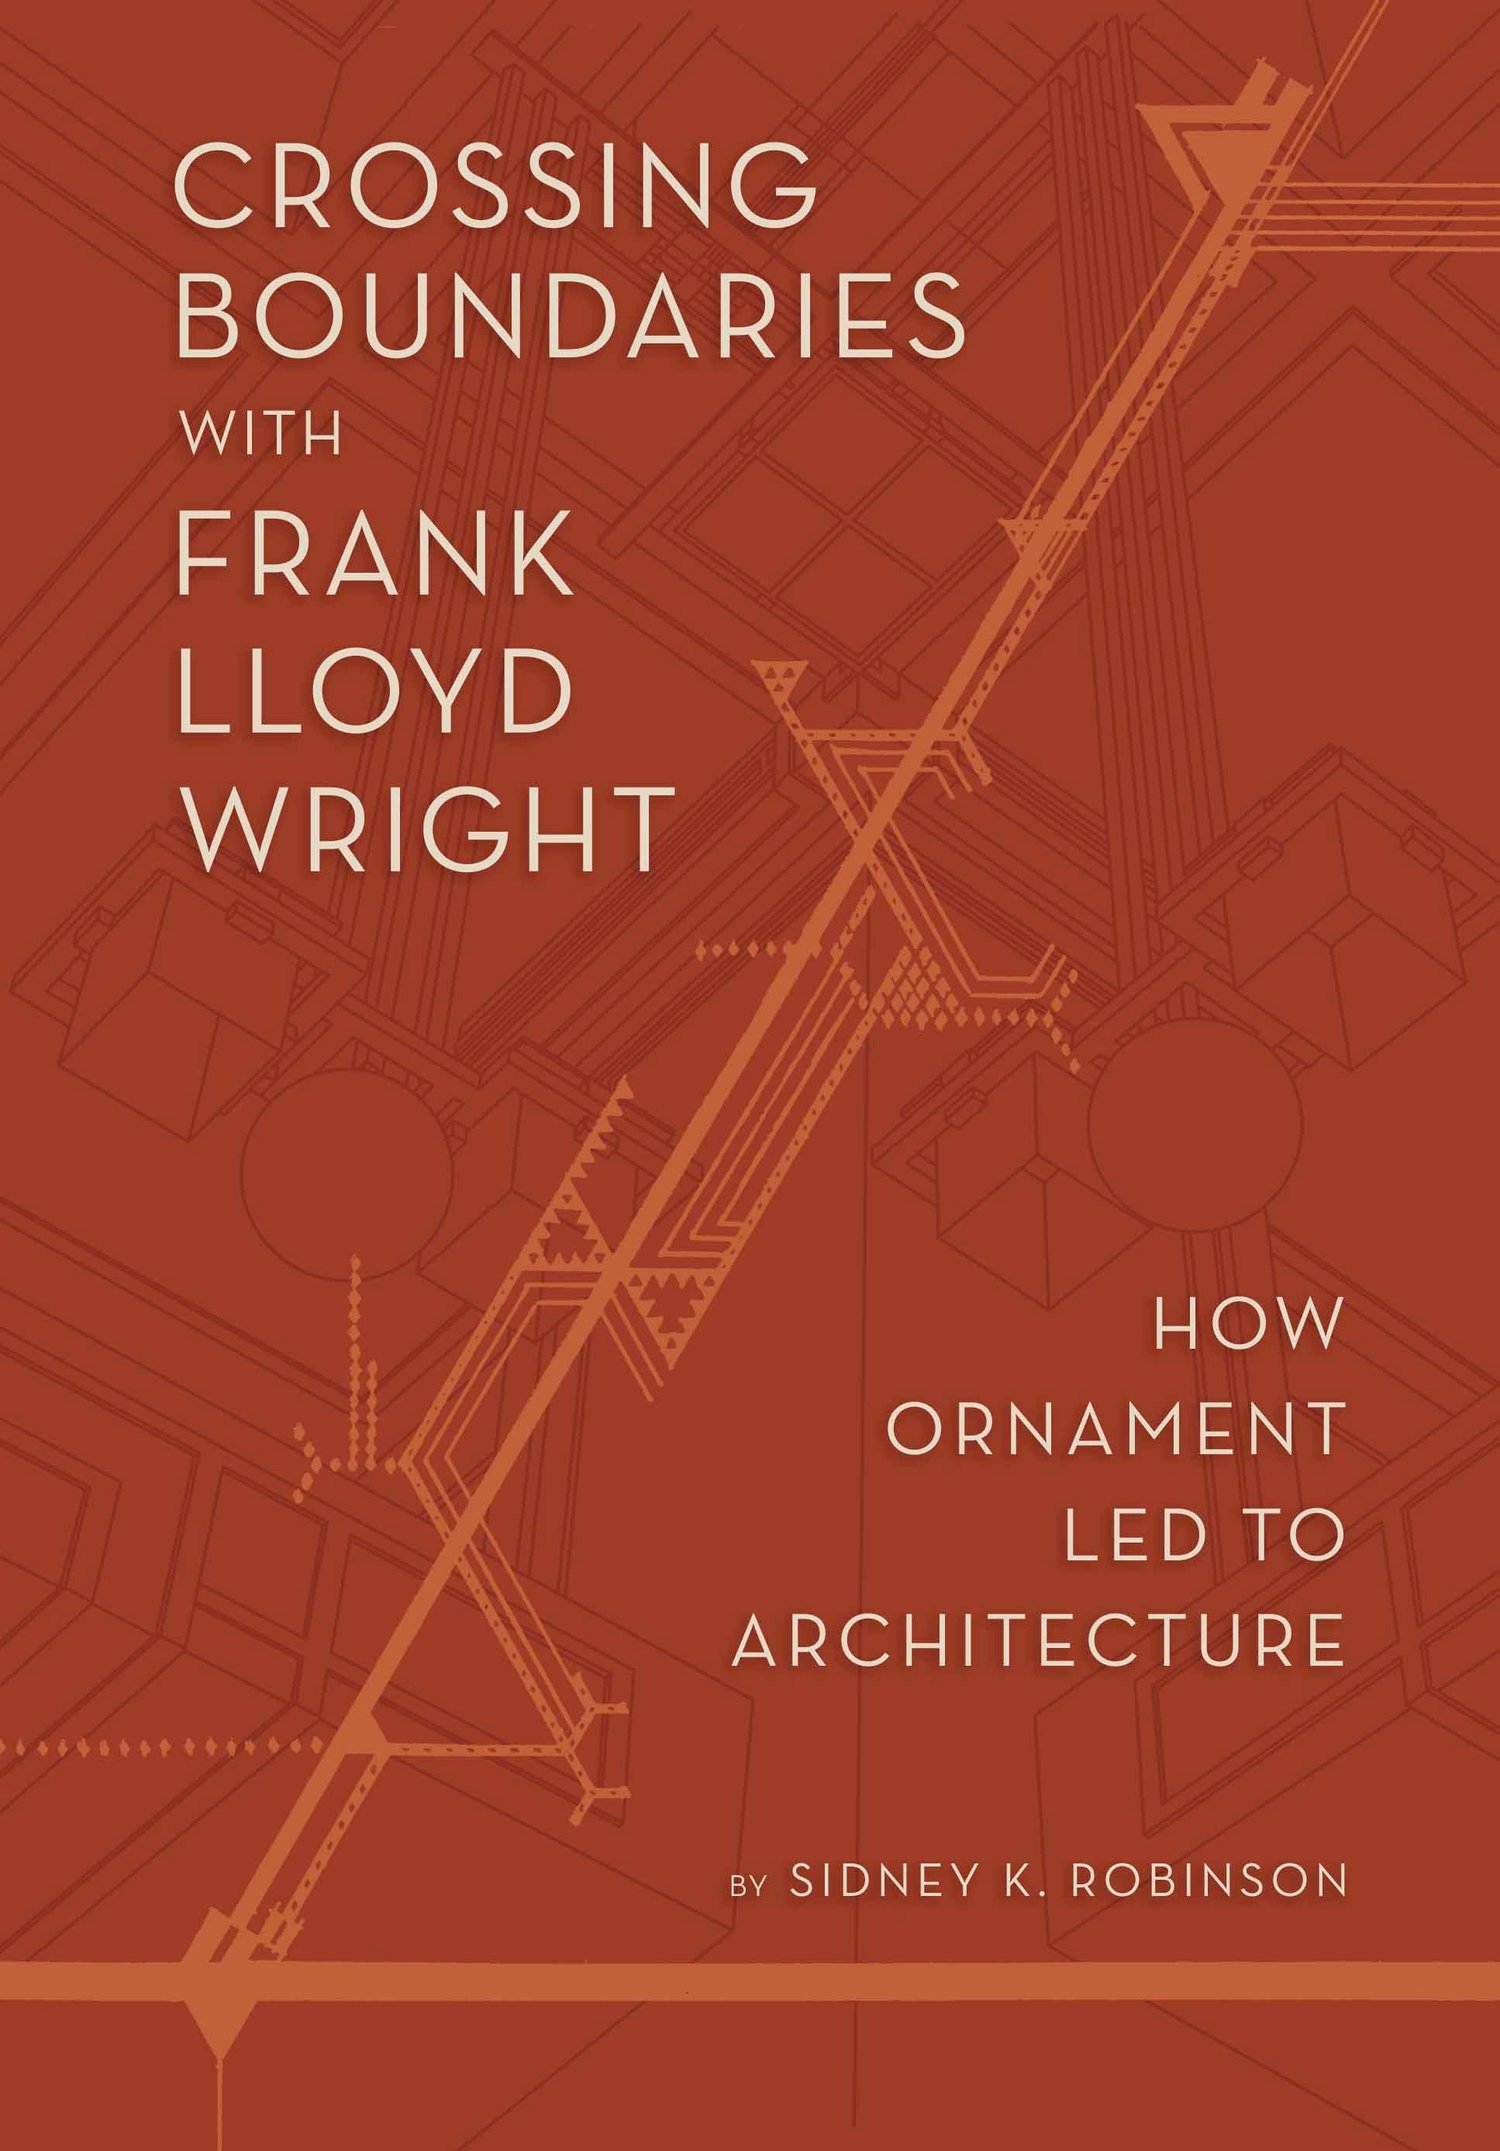 Image of Crossing Boundaries with Frank Lloyd Wright: How Ornament Led to Architecture